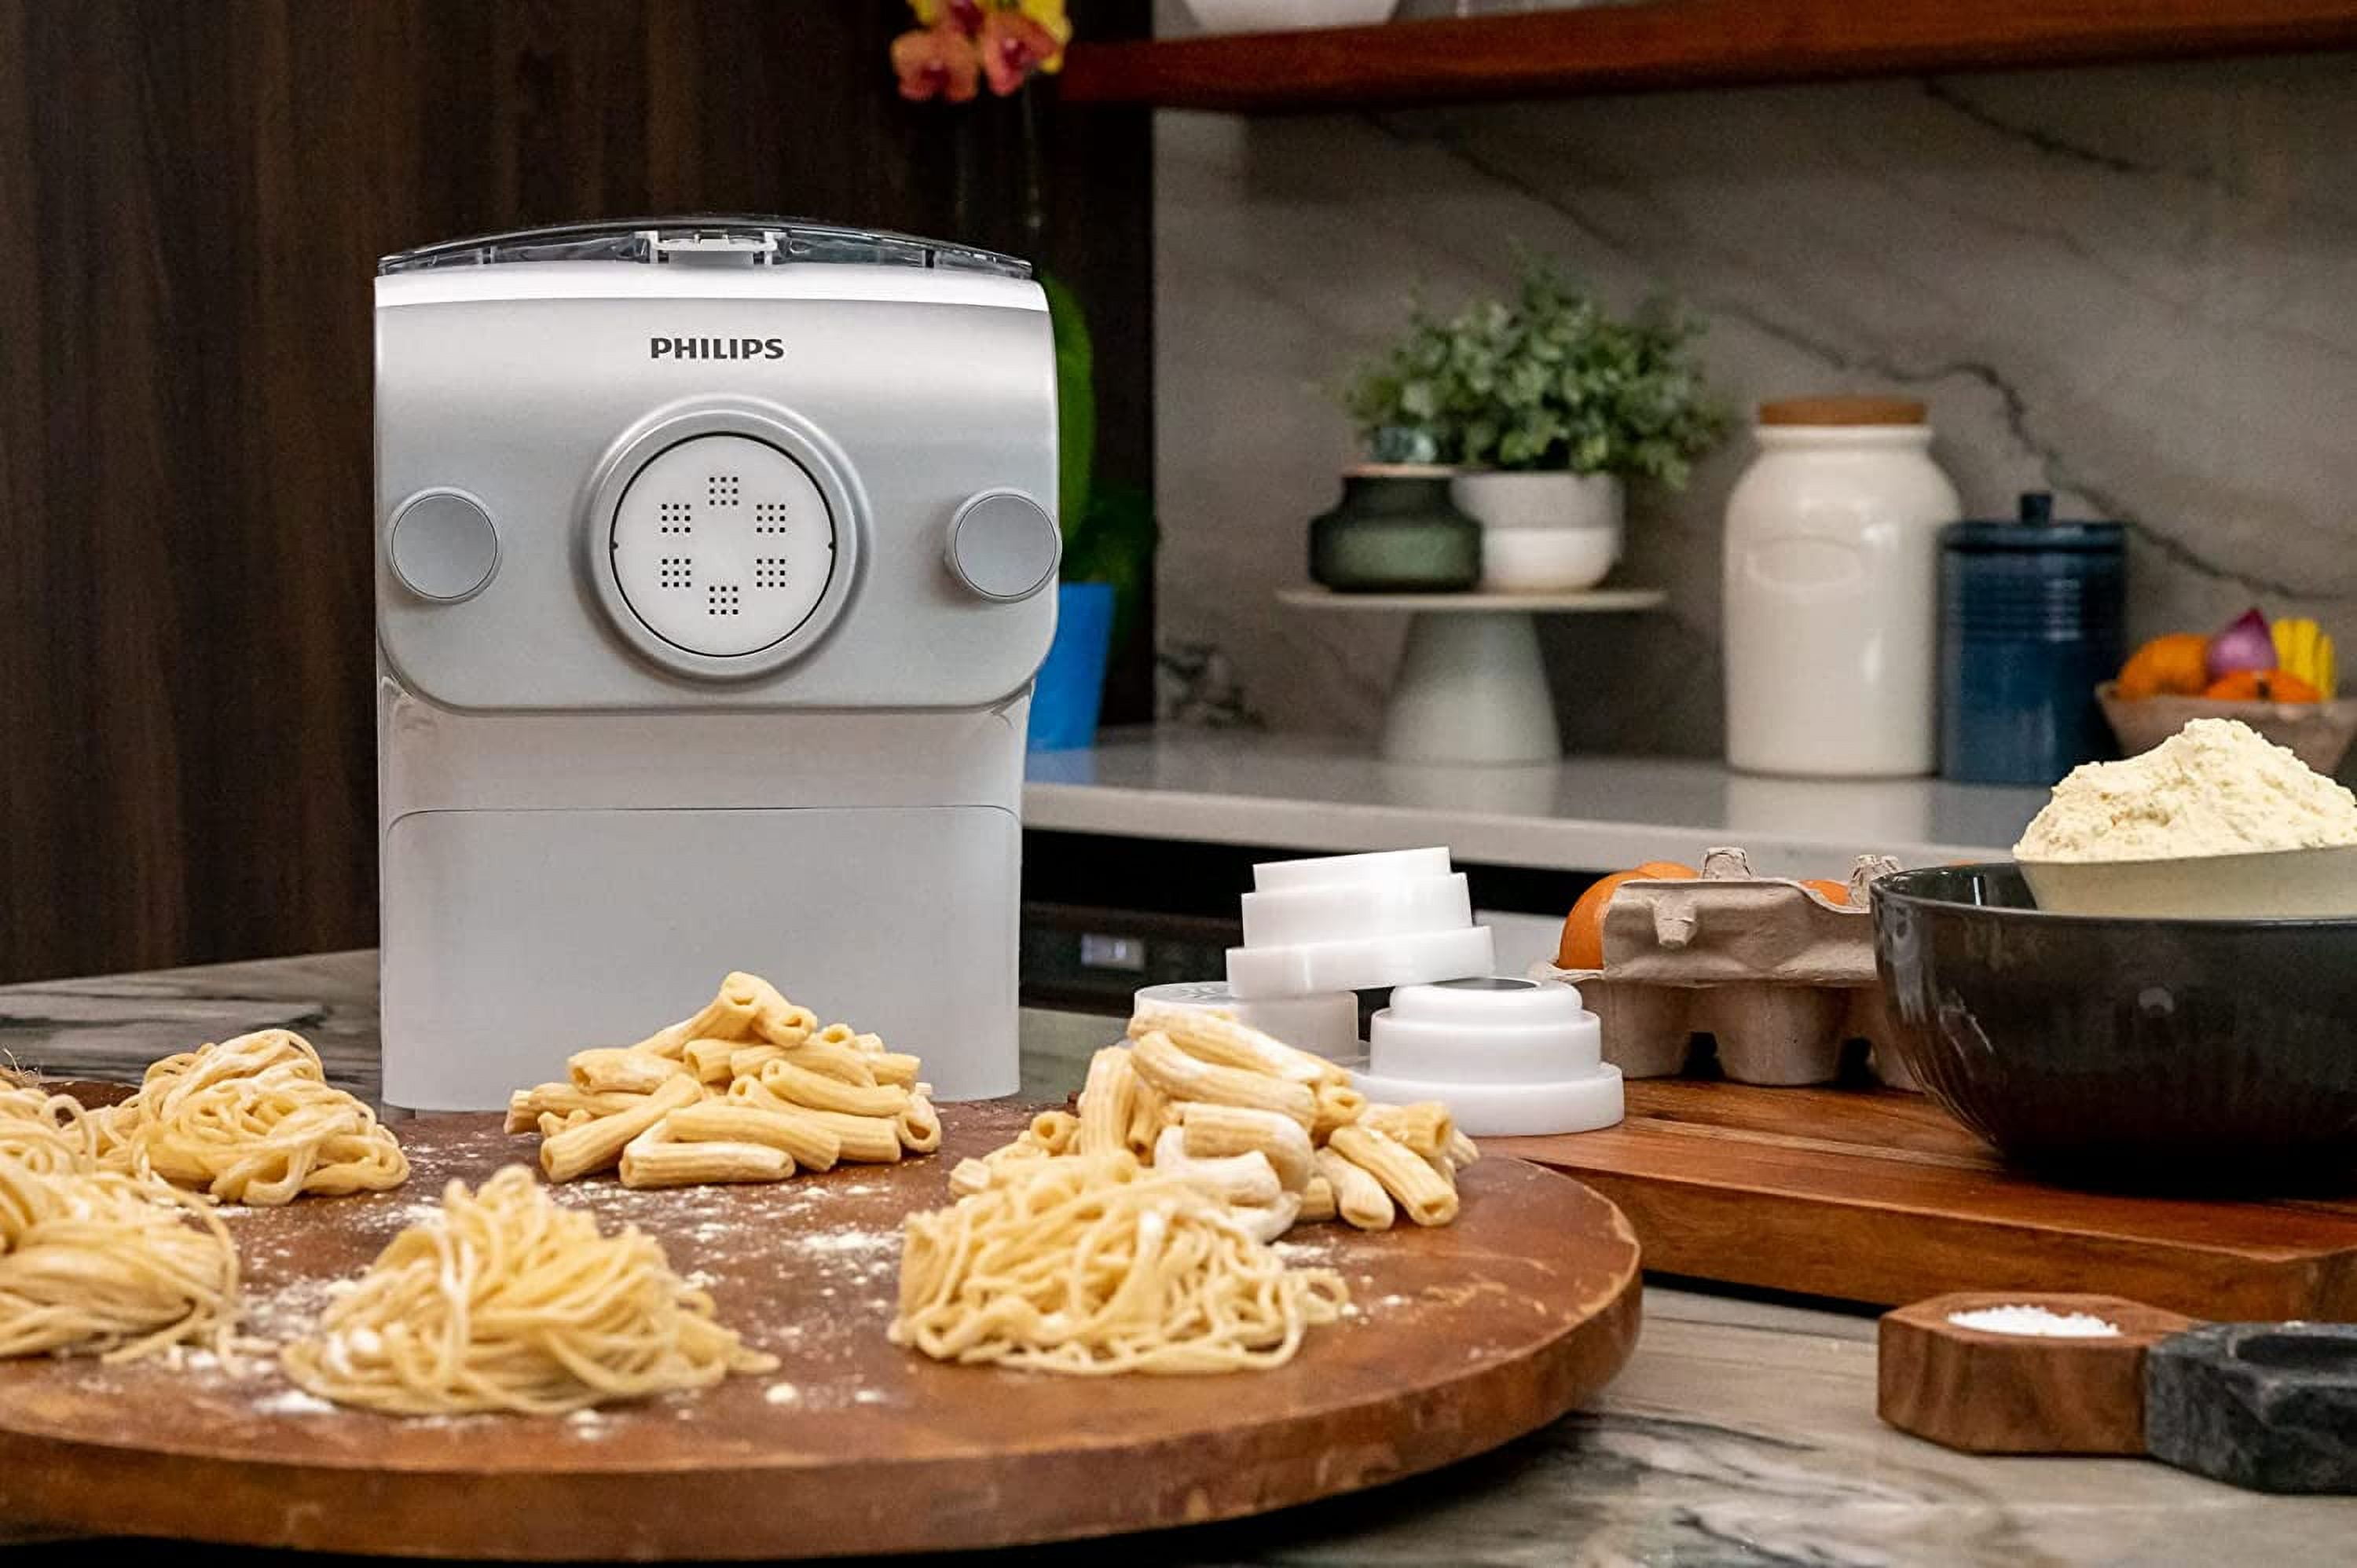 Avance Collection Pasta Maker HR2382/16 Philips, 50% OFF